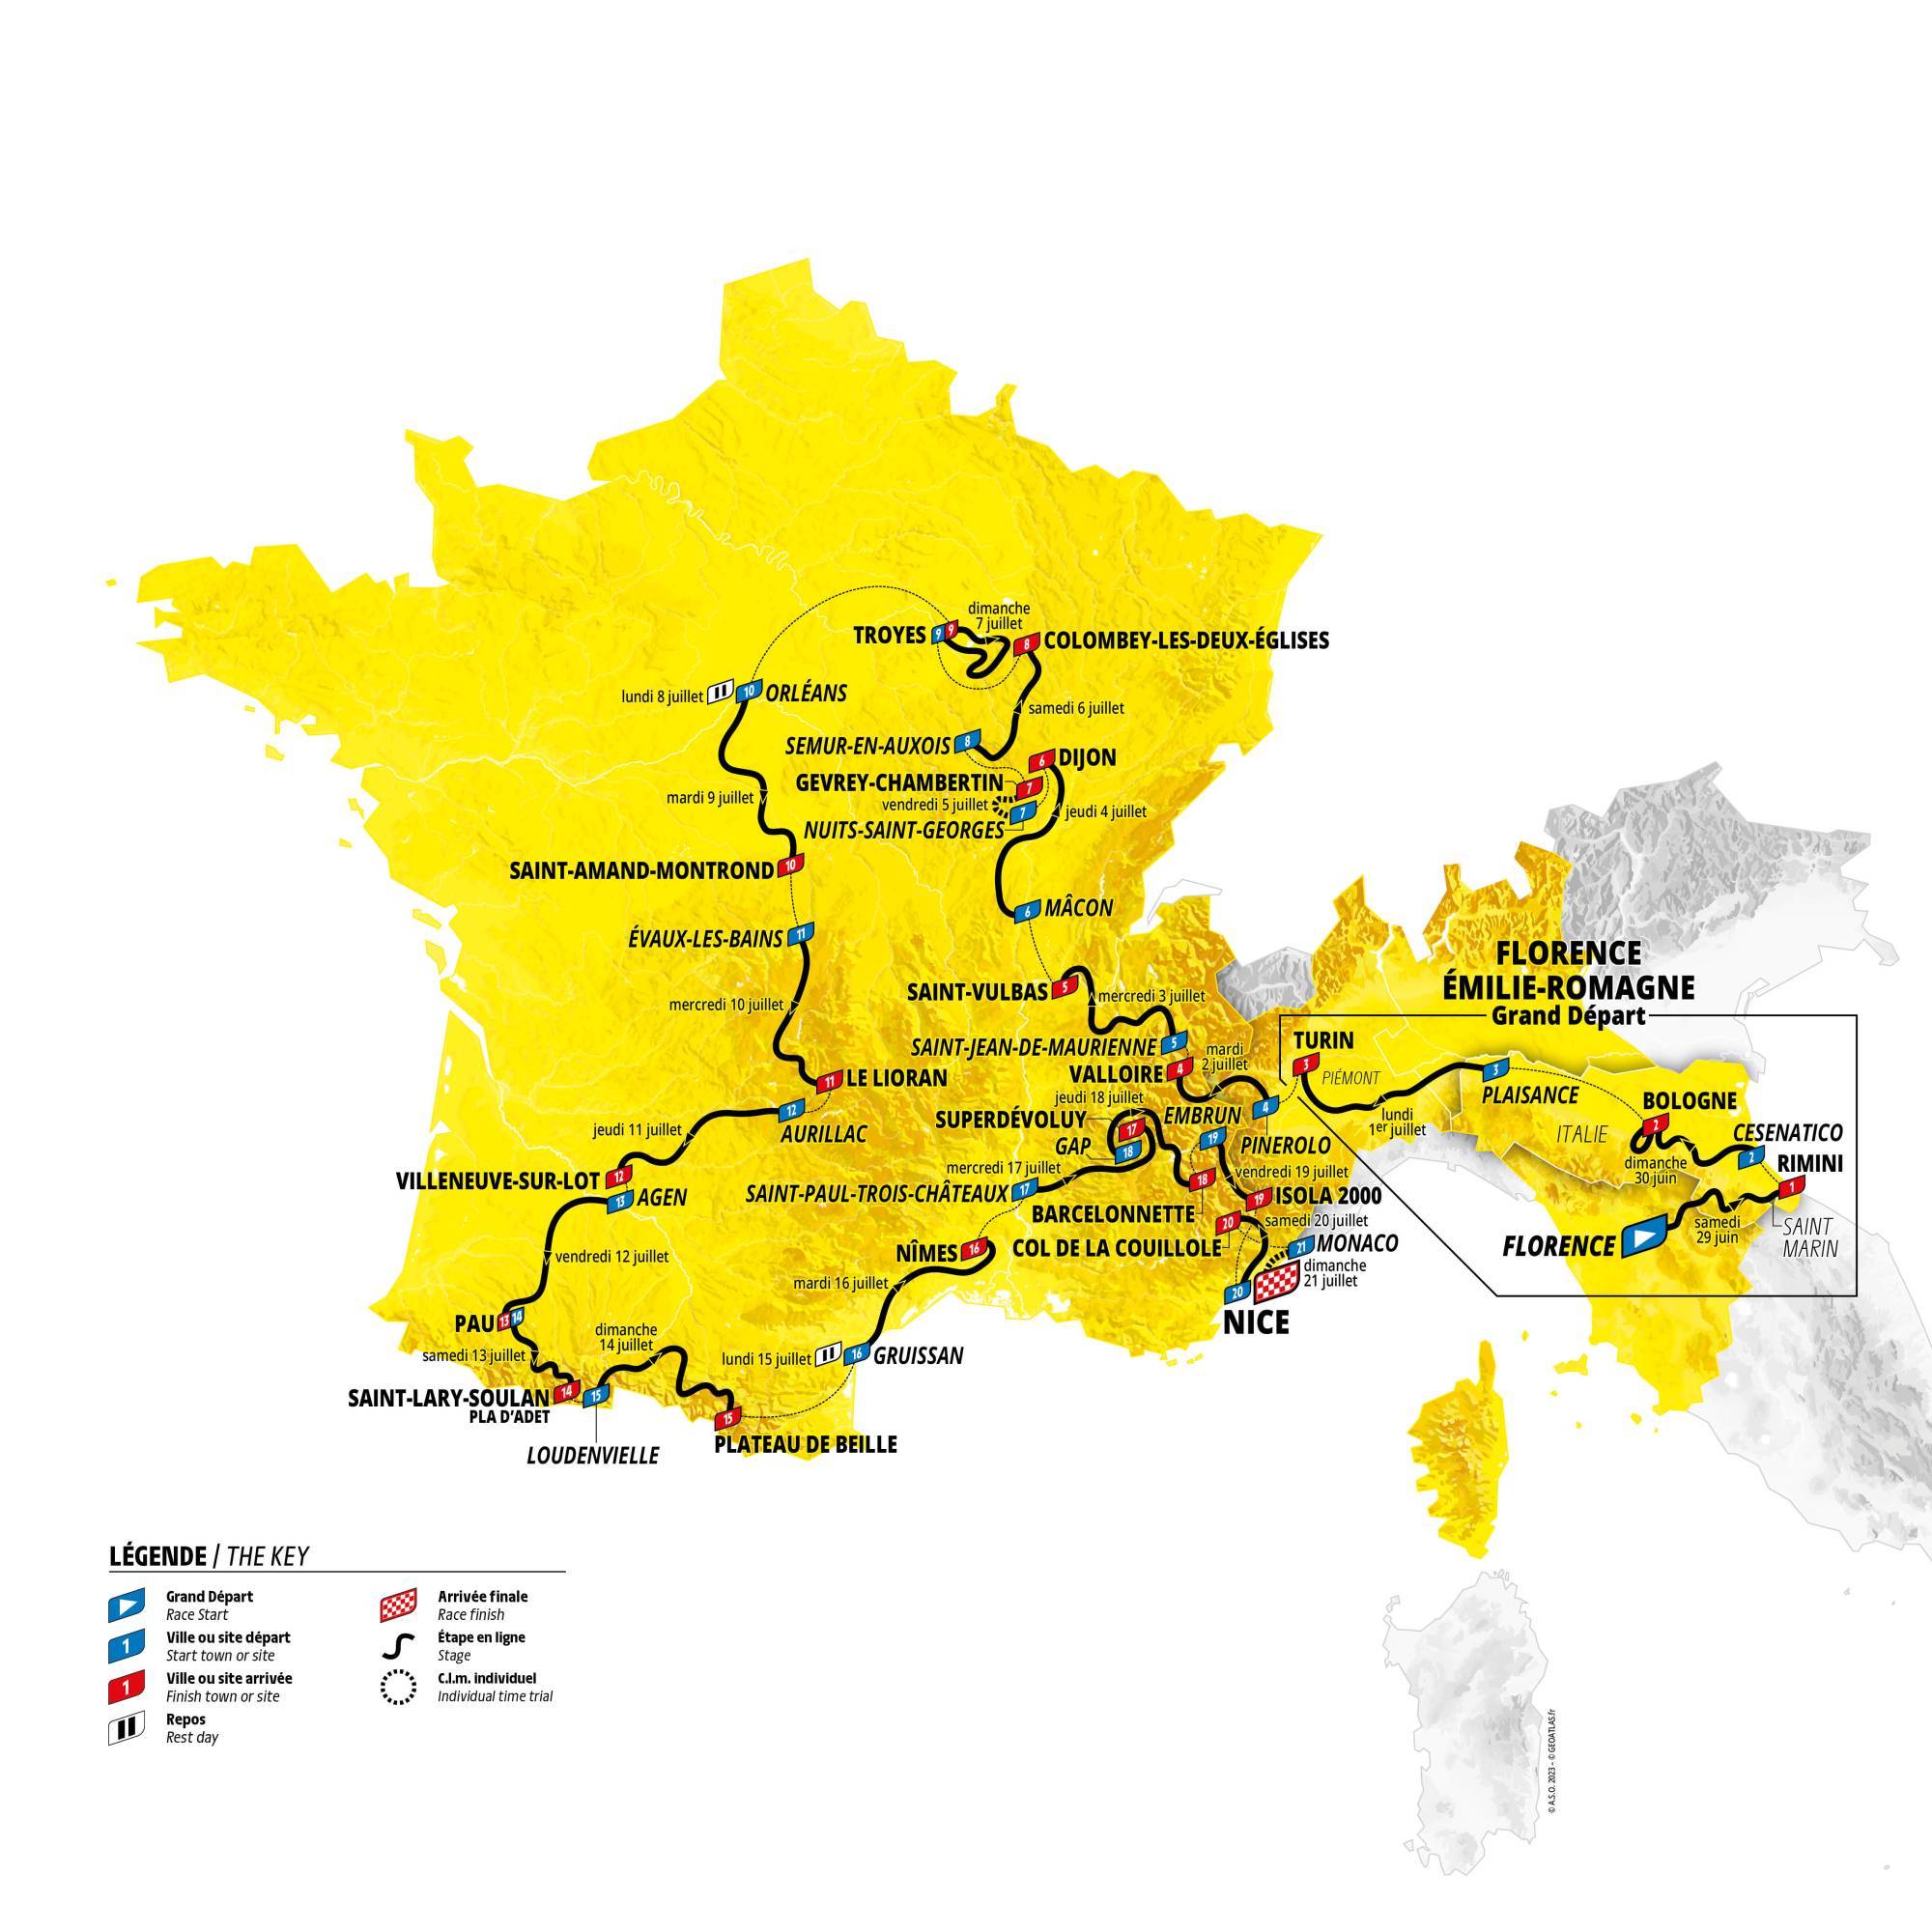 THE BICI GUIDE TO THE TOUR DE FRANCE